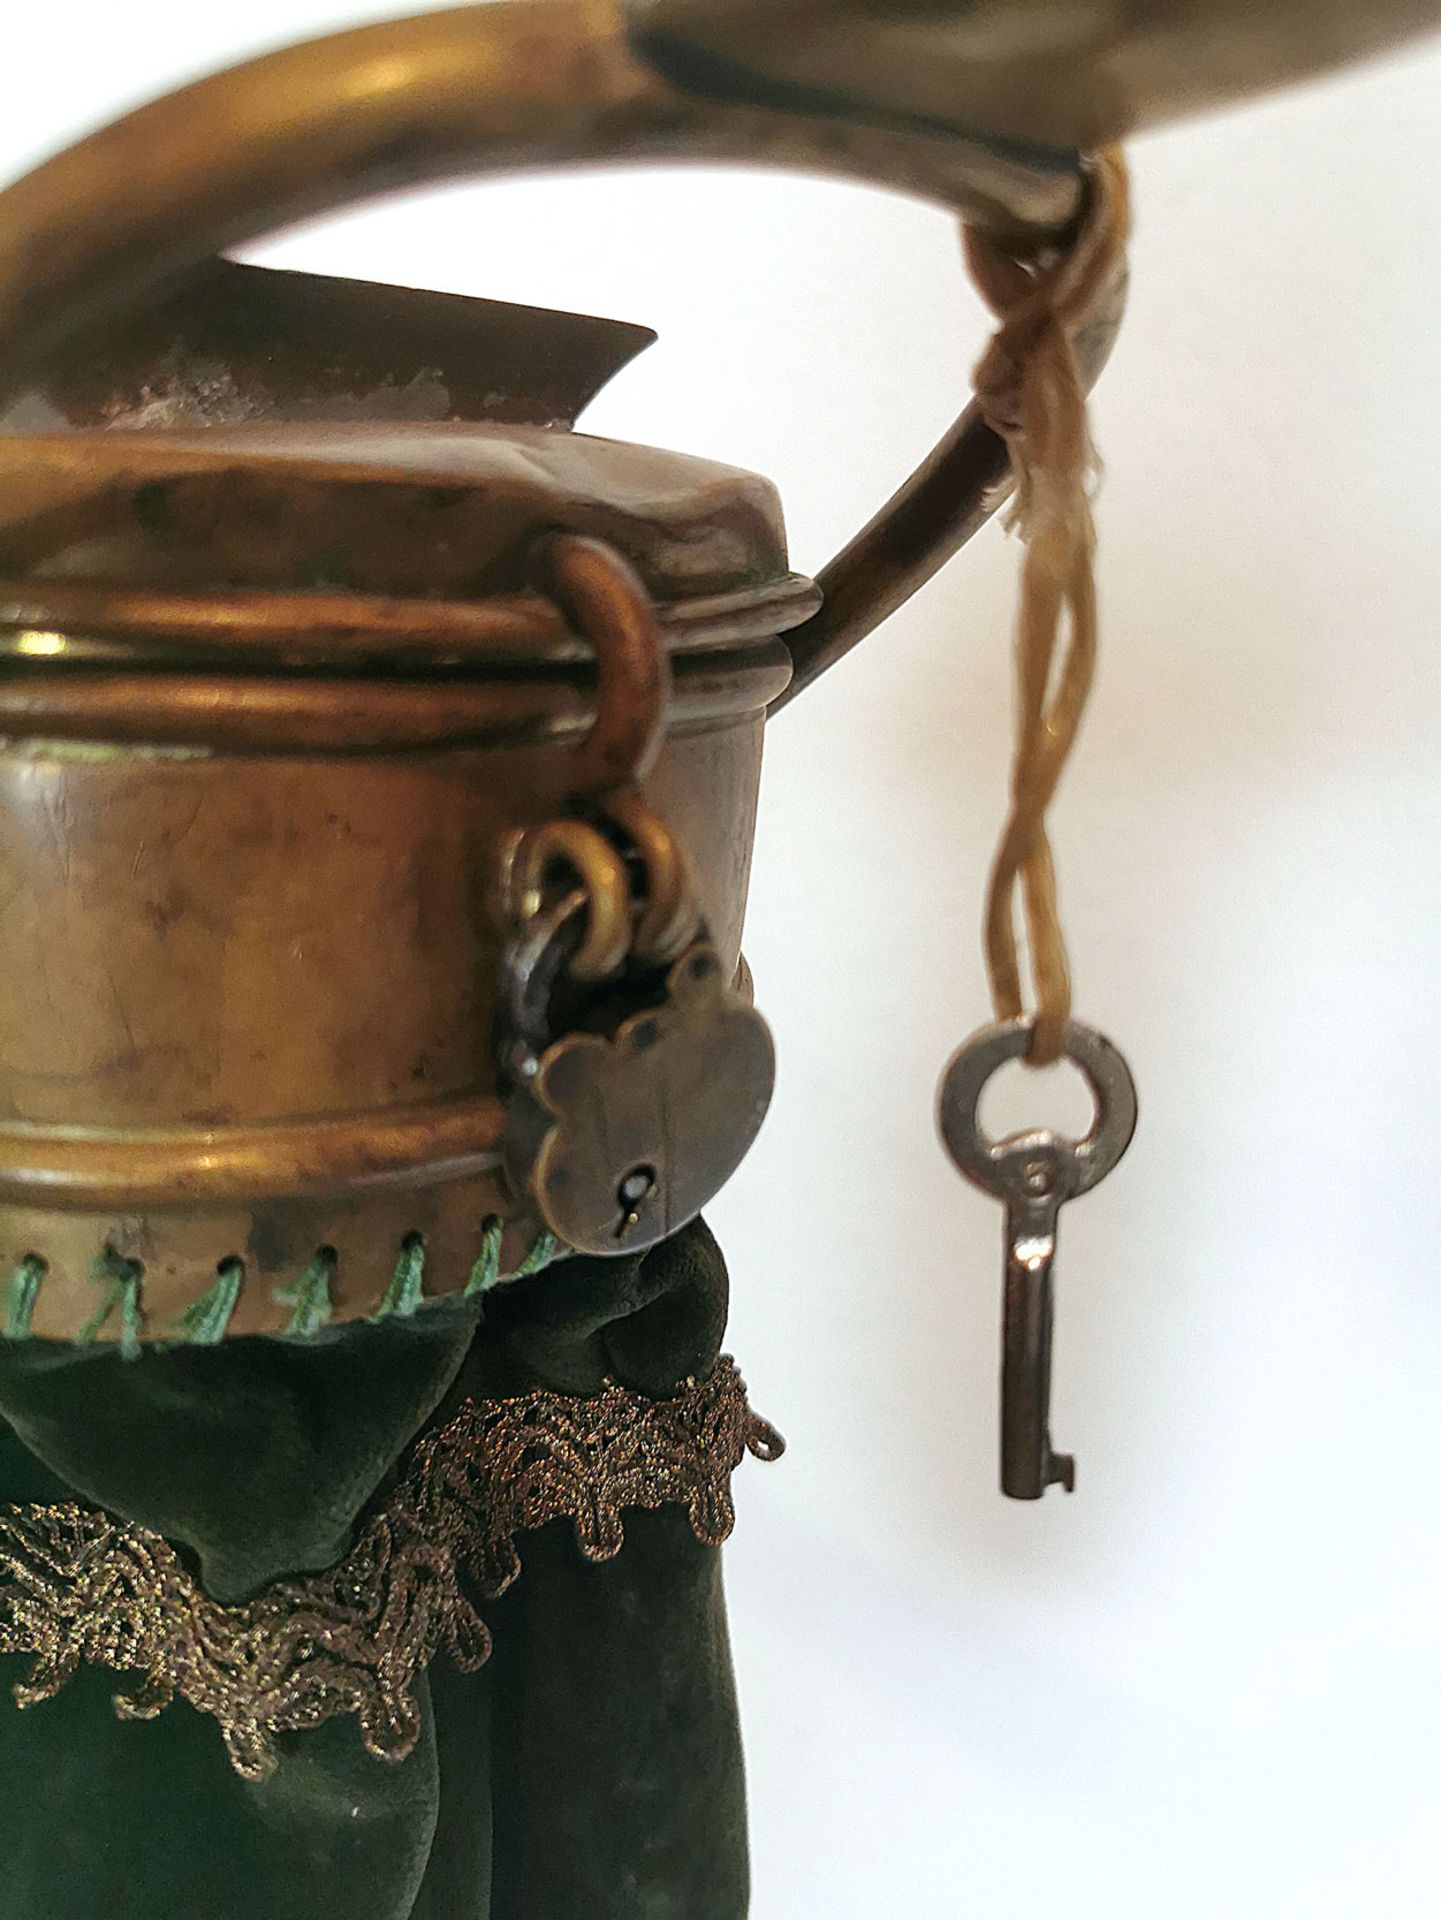 Church Money Collector with brass Top and Velvet Bag. - Image 3 of 5